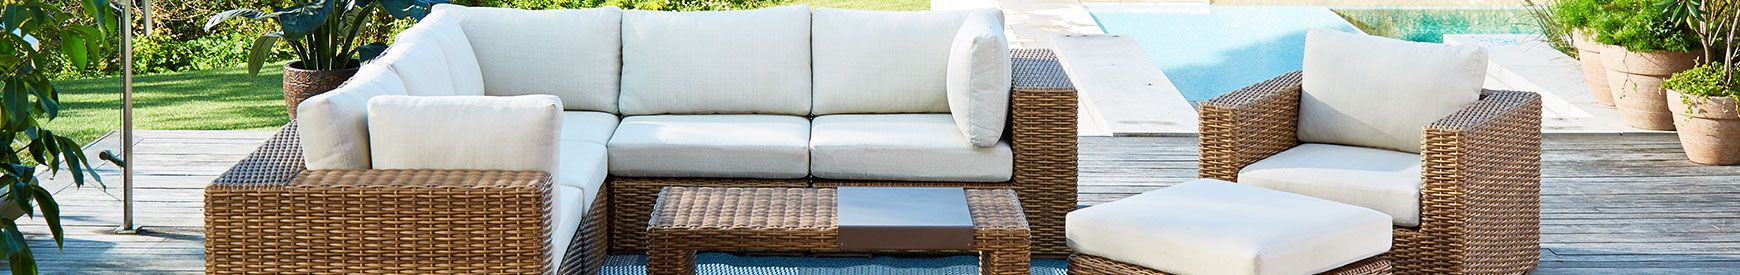 Canadian Tire Outdoor Patio Furniture Sets - Patio Furniture